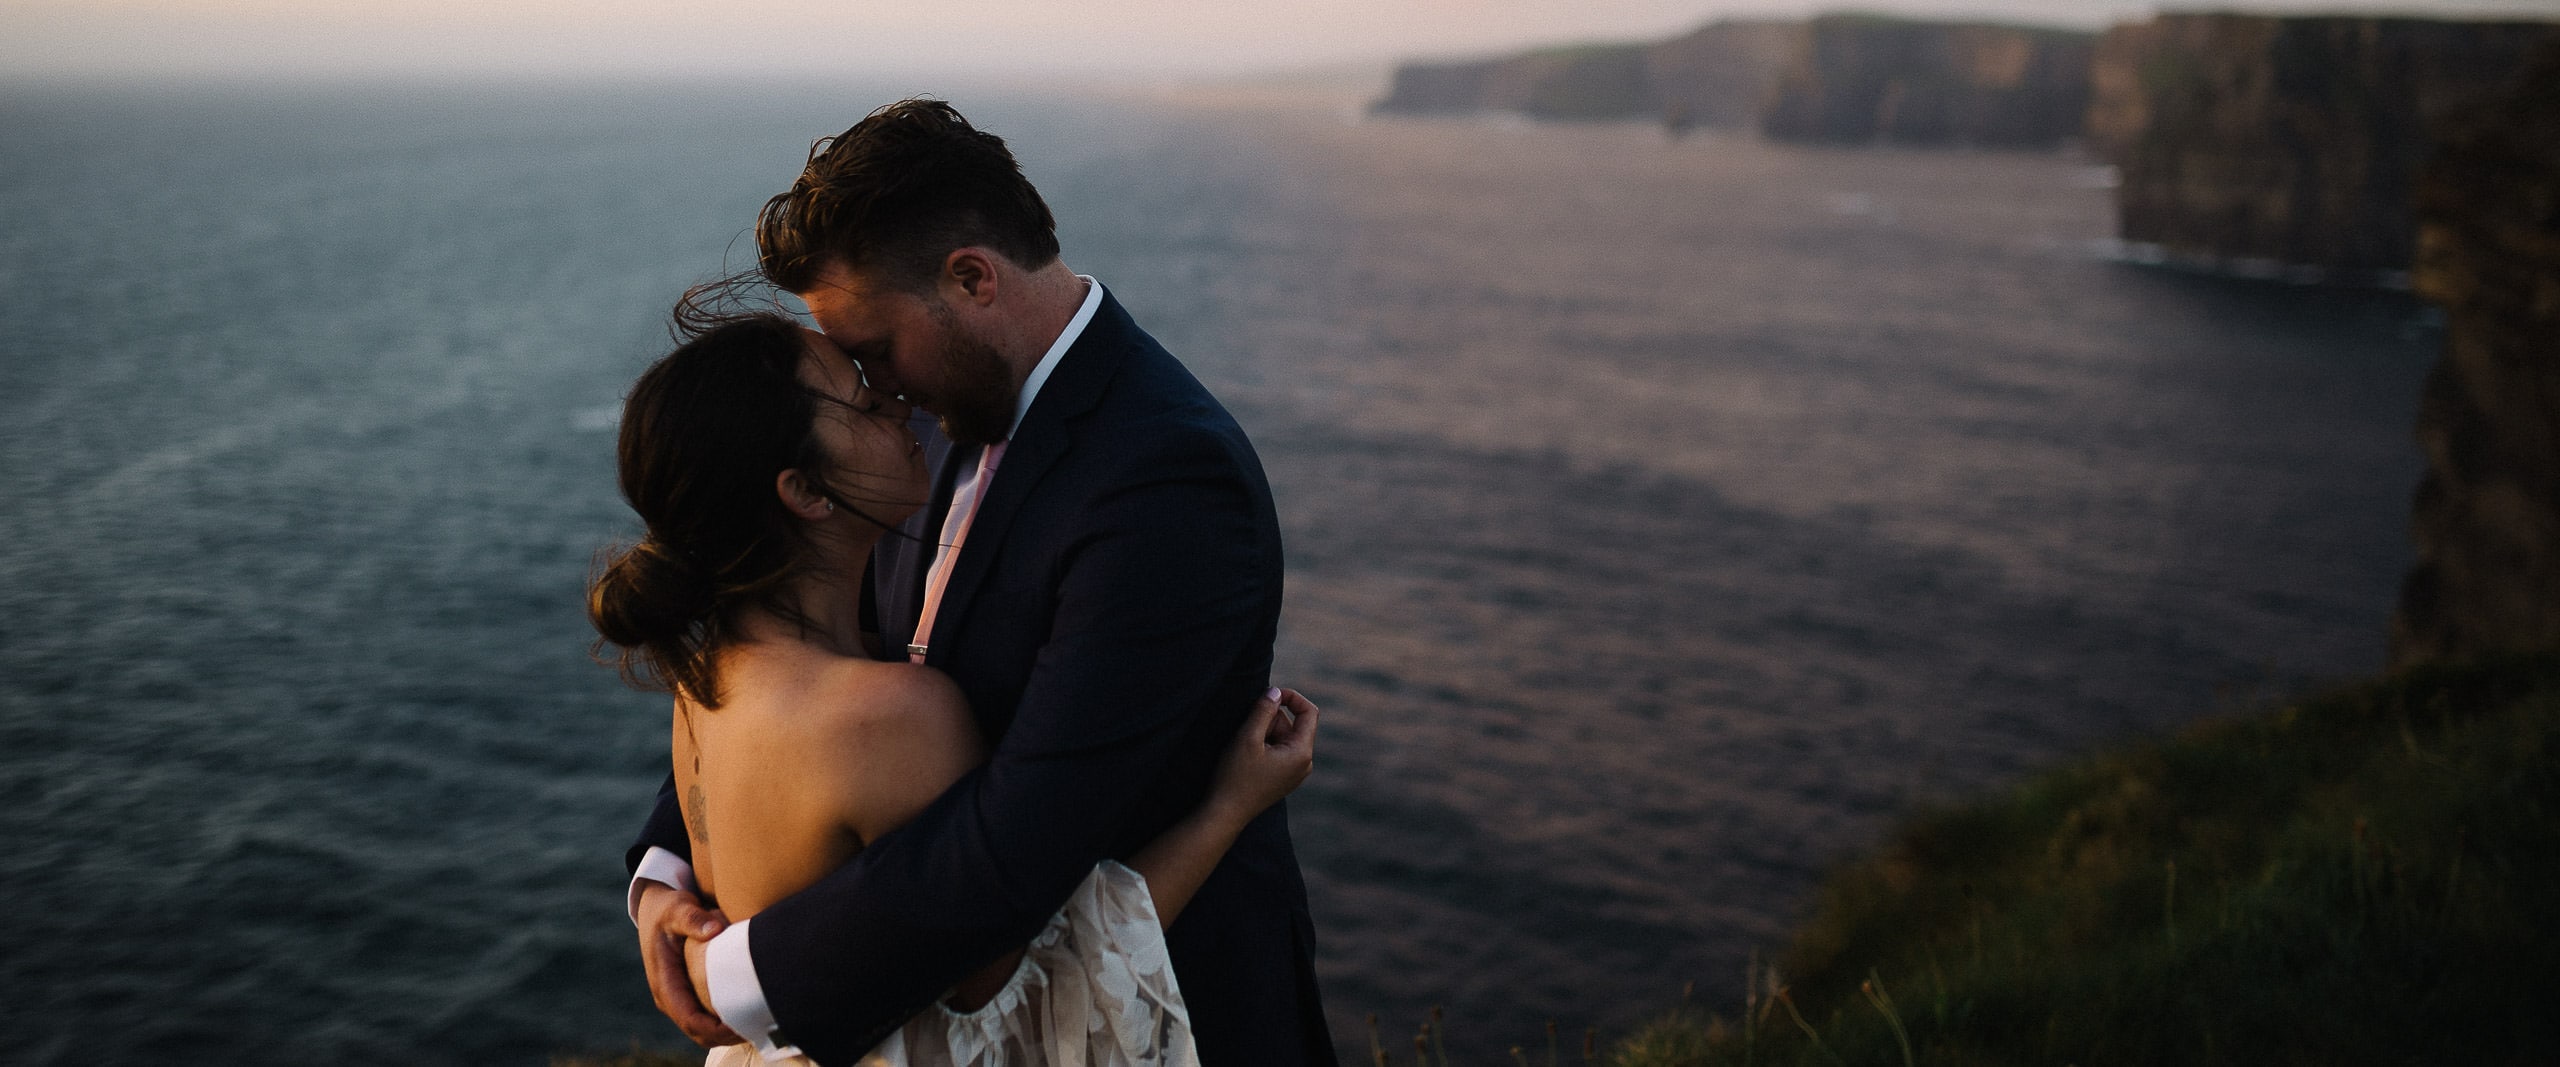 A Guide to Cliffs of Moher Elopements // How to Plan an Elopement on the Cliffs of Moher